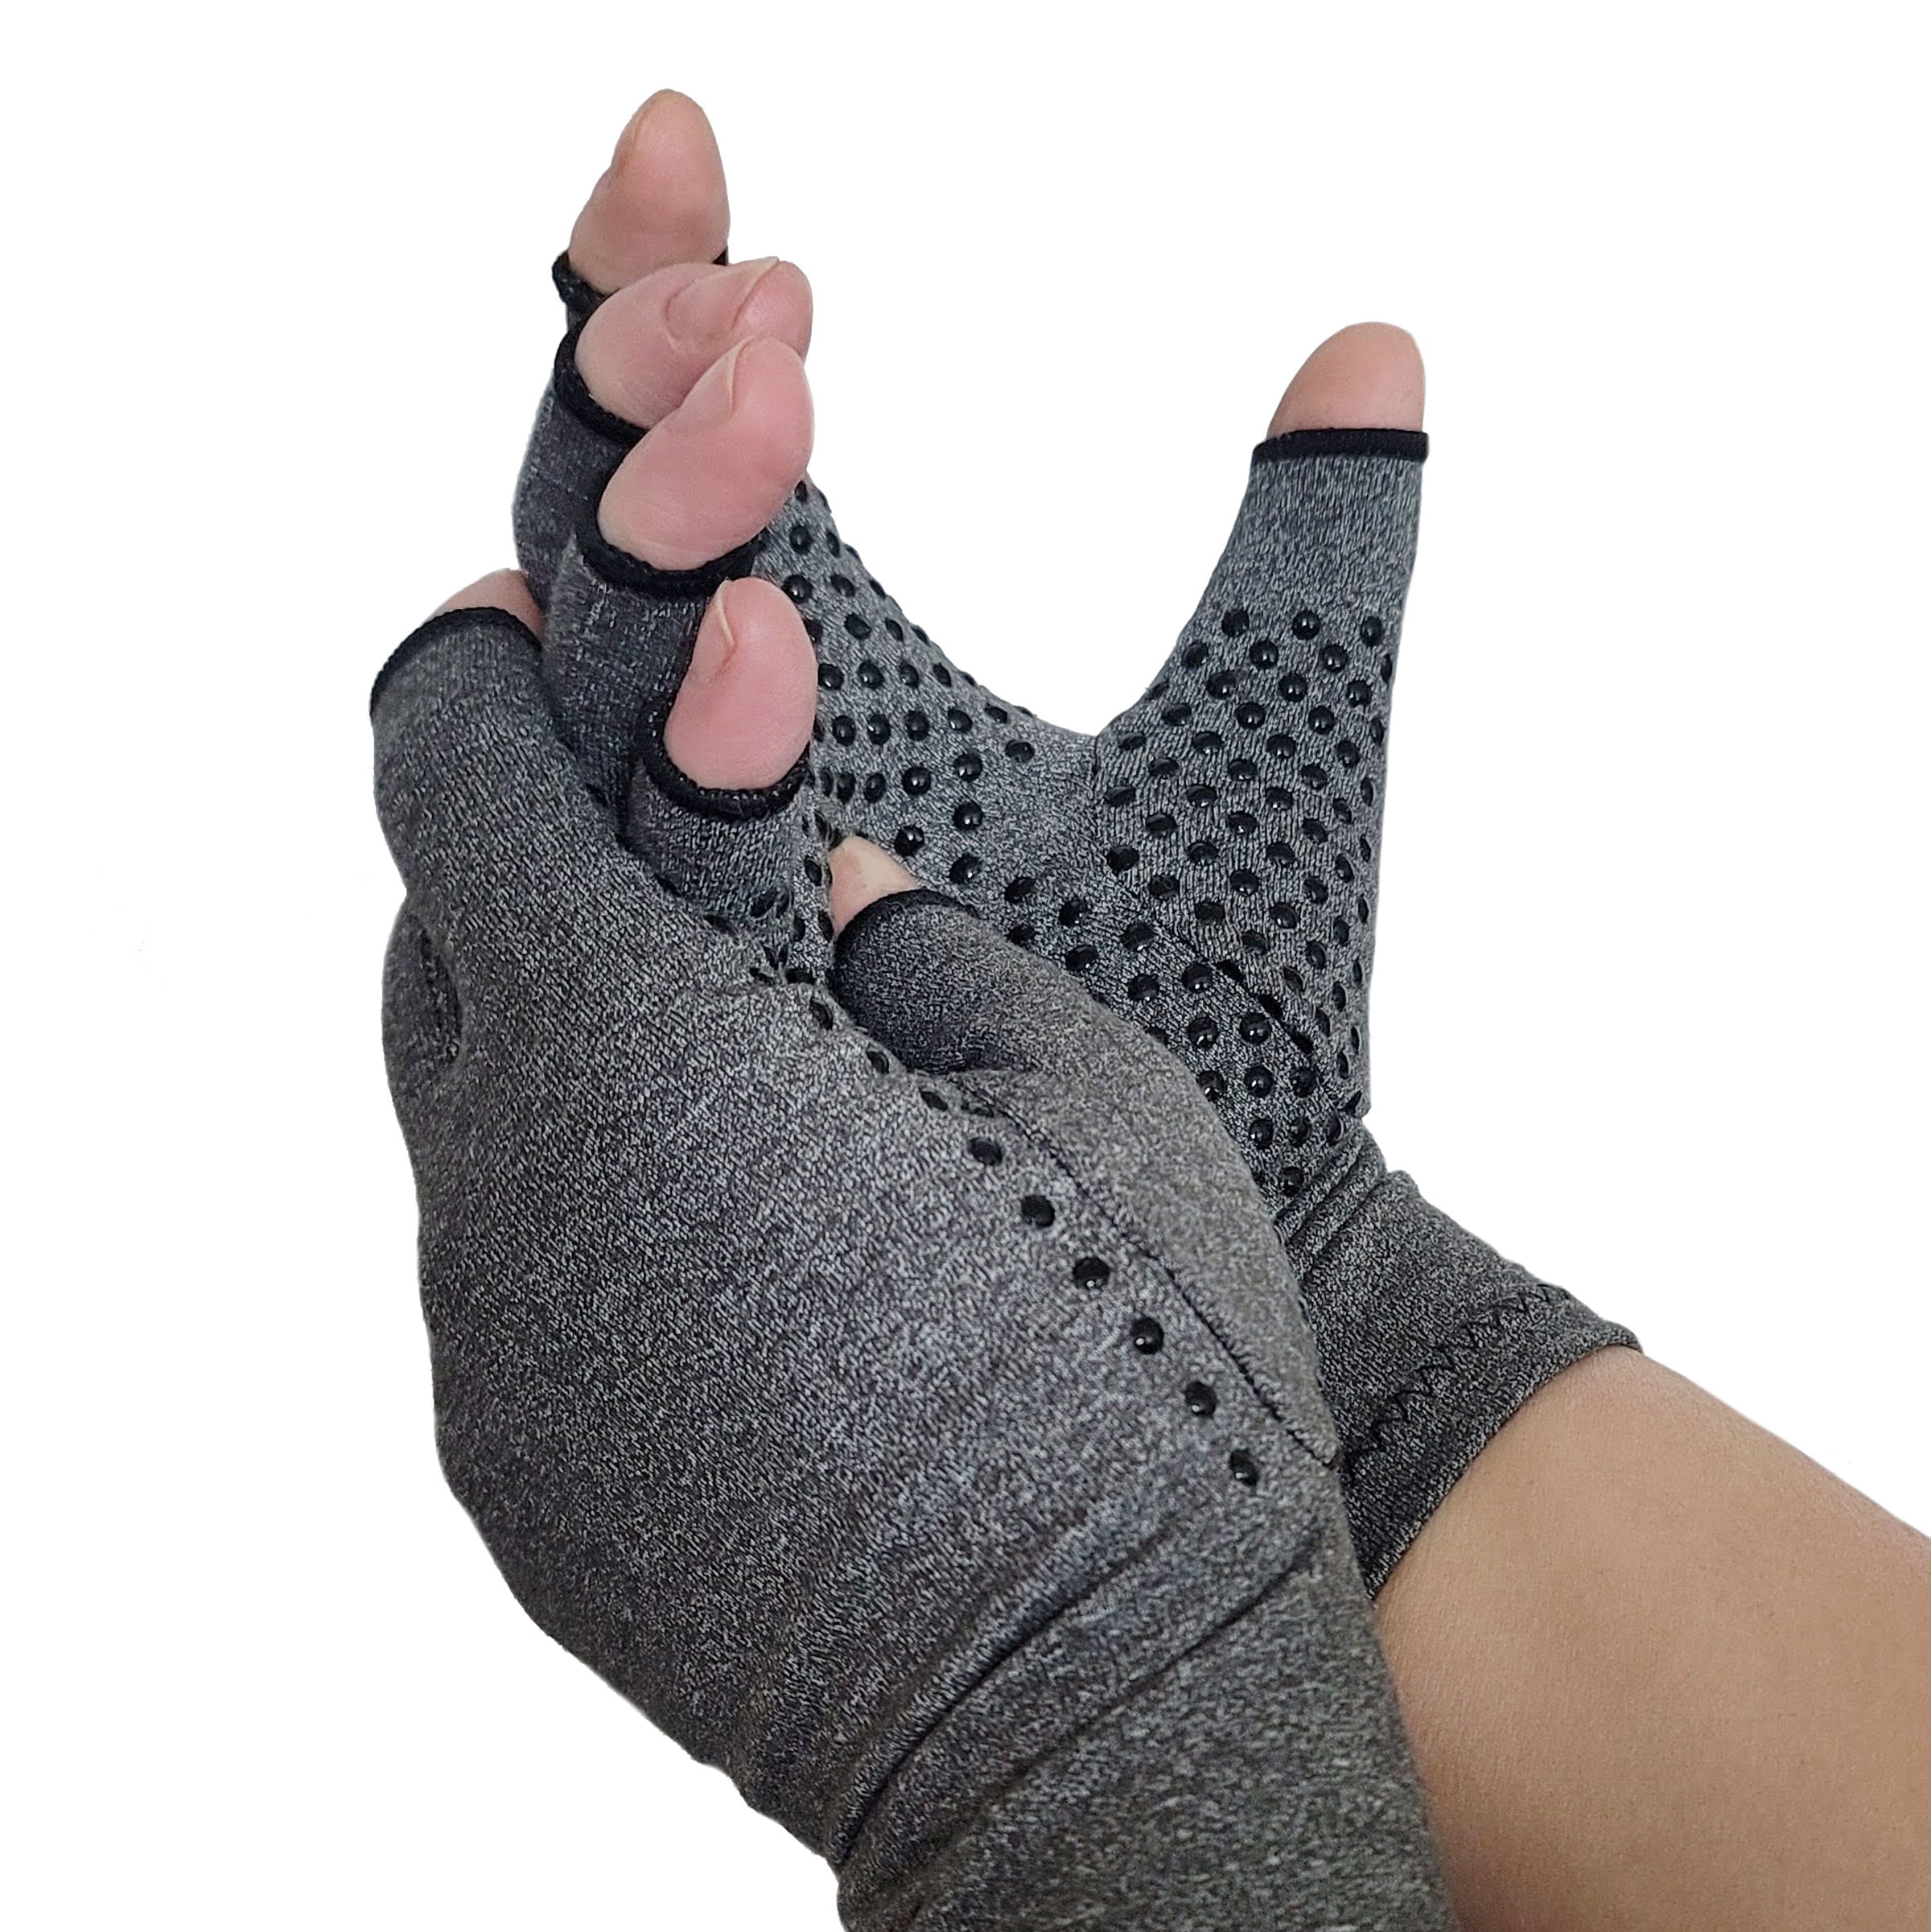 Arthritis Cotton Gloves- Premium Arthritic Joint Pain Relief Hand  Compressions Gloves for Rheumatoid & Osteoarthritis, Valentines Day Gifts 